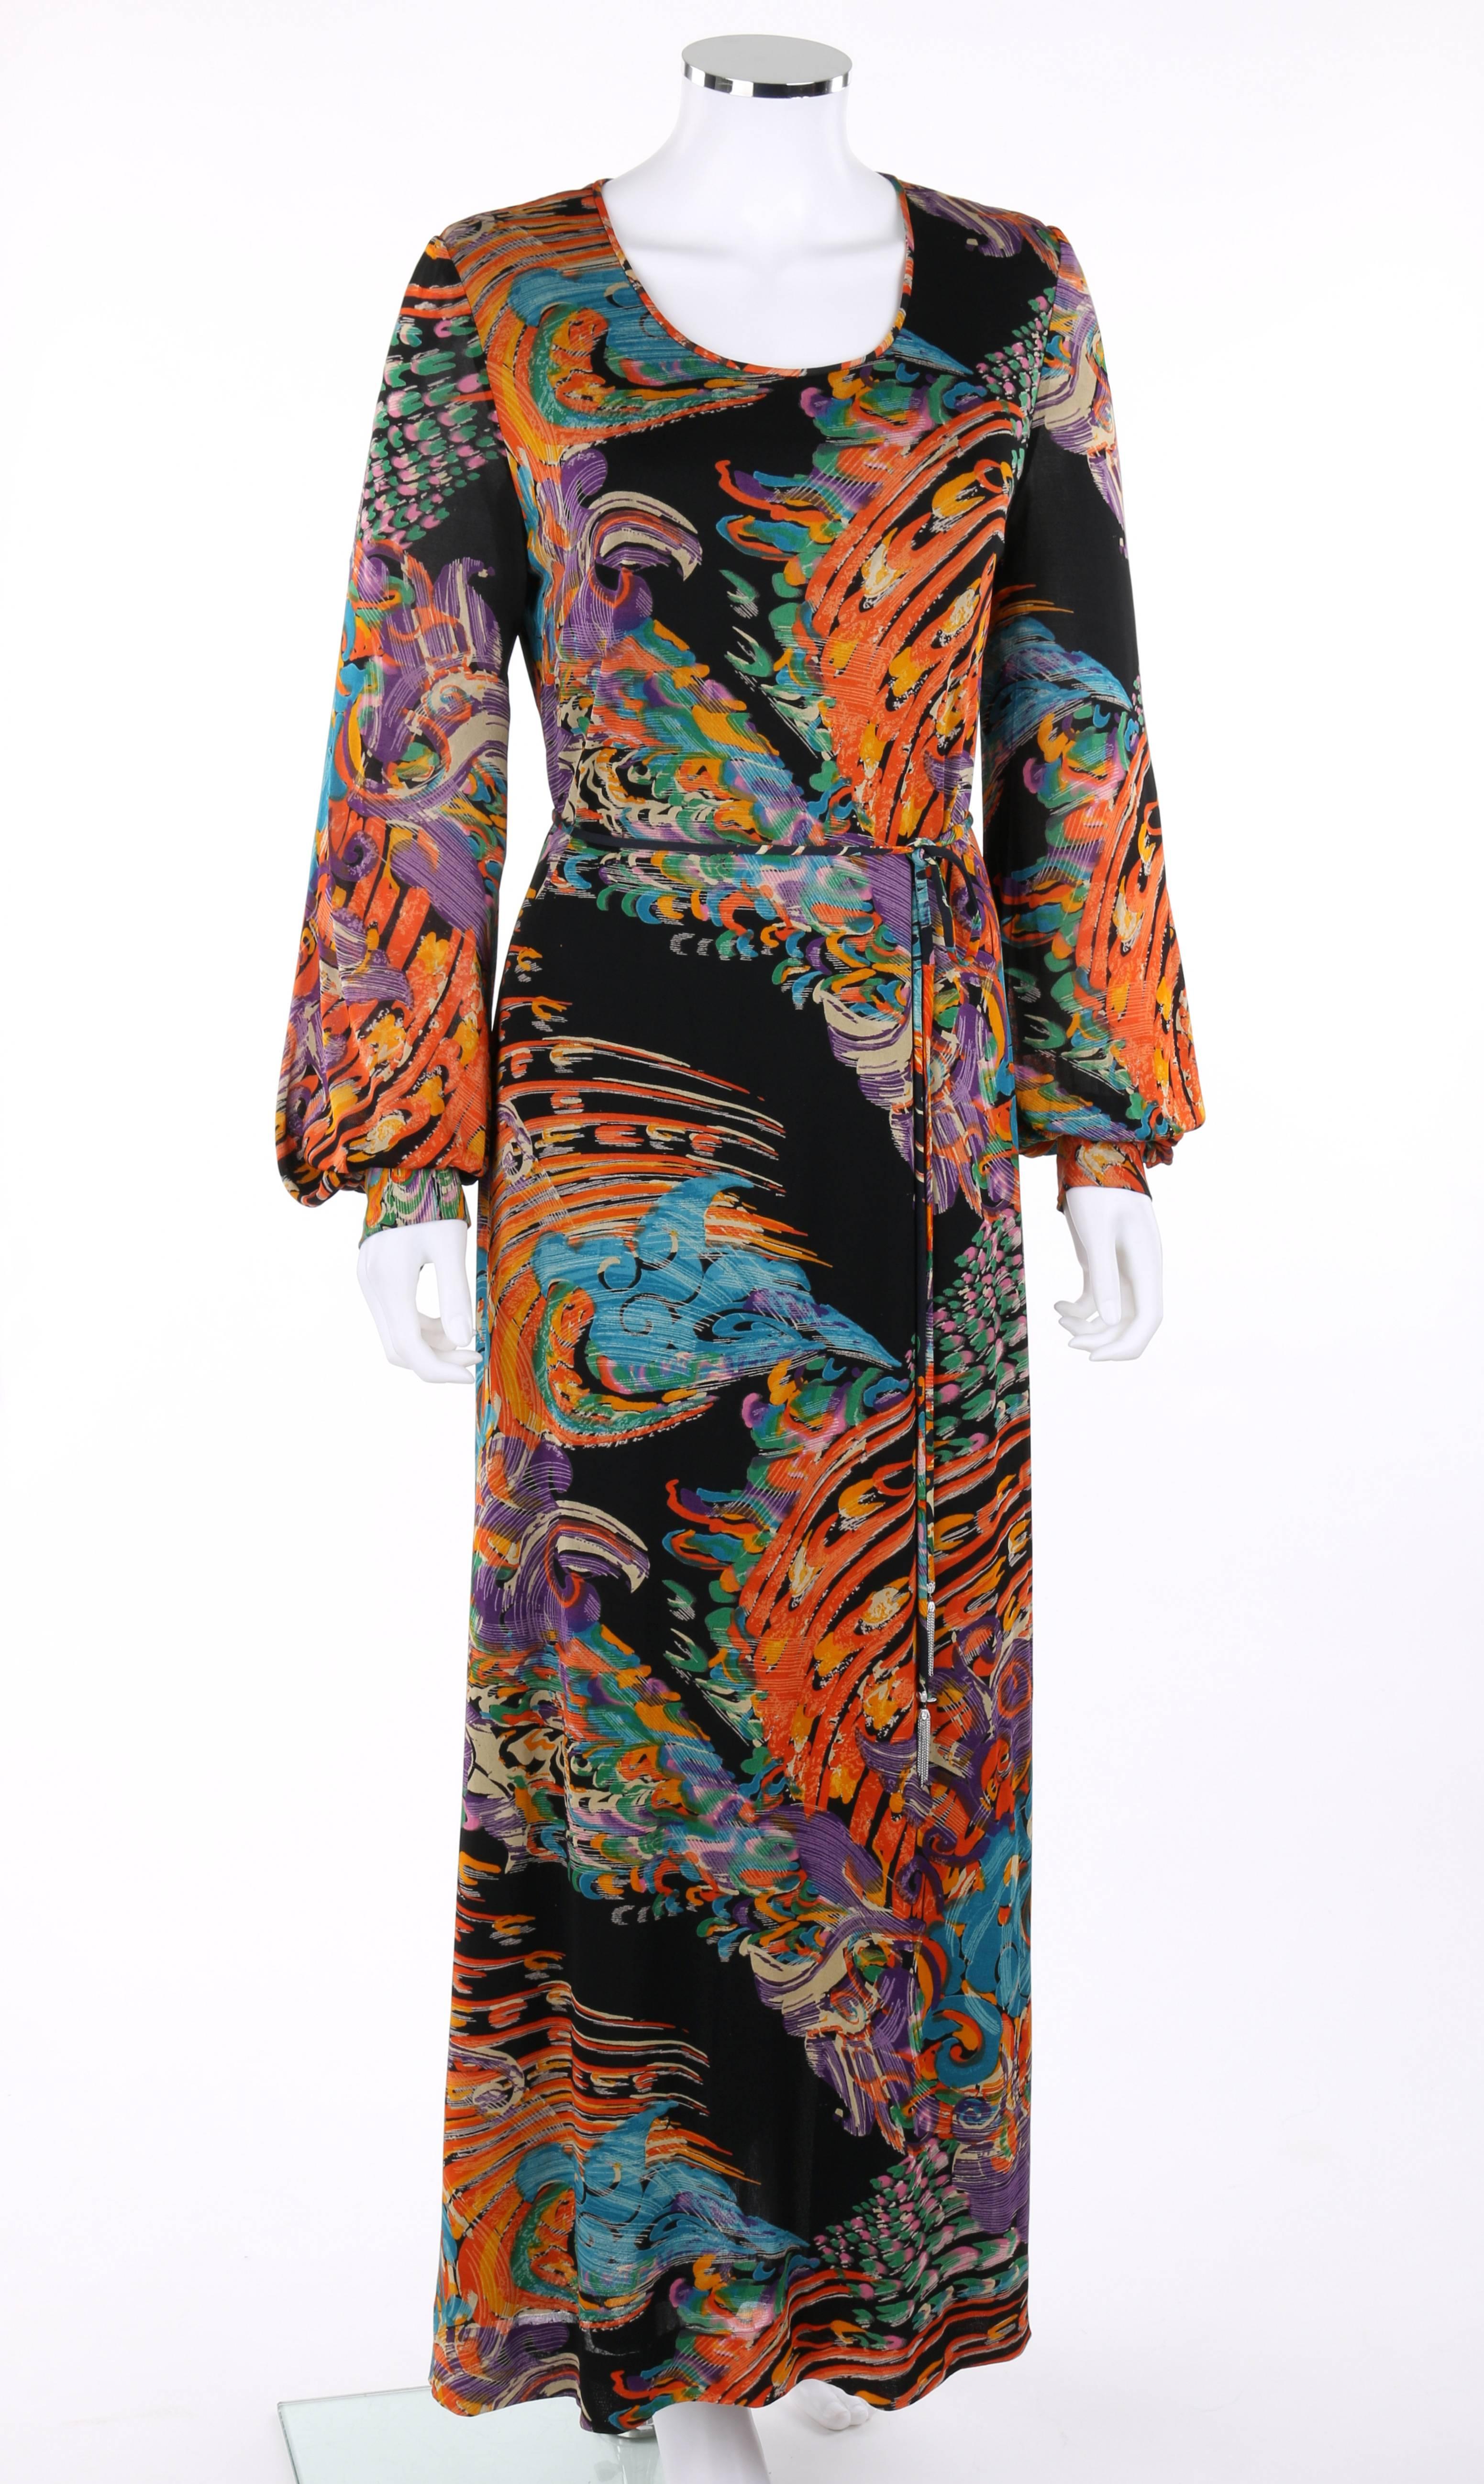 Vintage Givenchy Nouvelle Boutique c.1970's knit maxi dress. Multicolor abstract painterly print in shades of orange, gold, green, blue, purple on black sheer knit. Long bishop sleeves with single silver-toned rhinestone floral button closure at